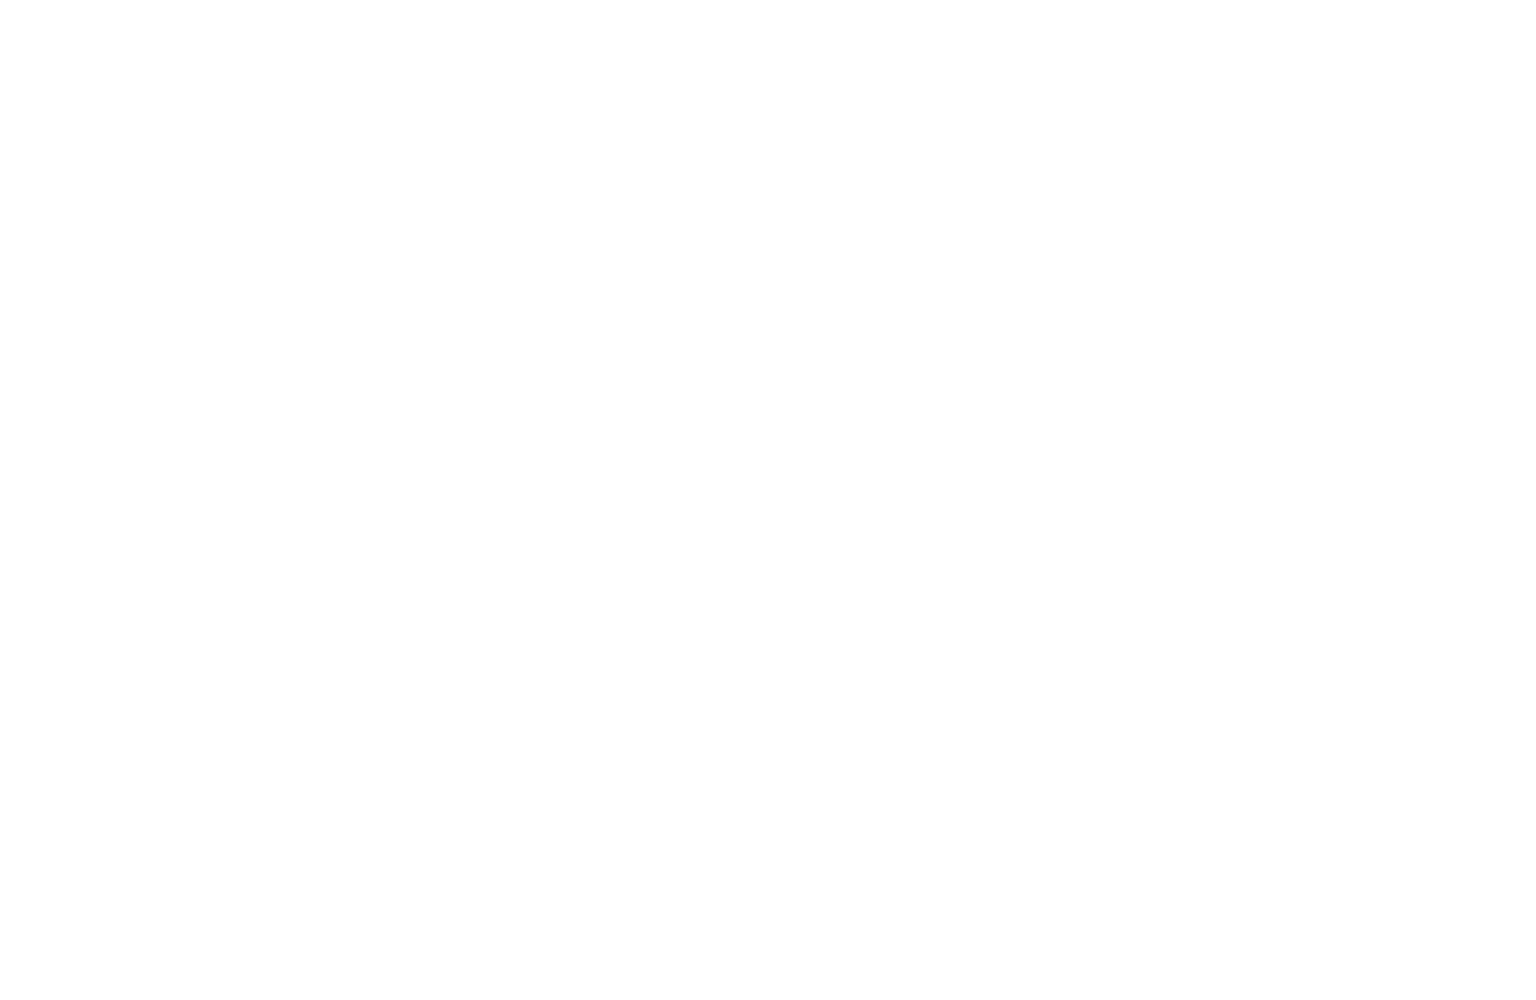 at the intersection of UX and code